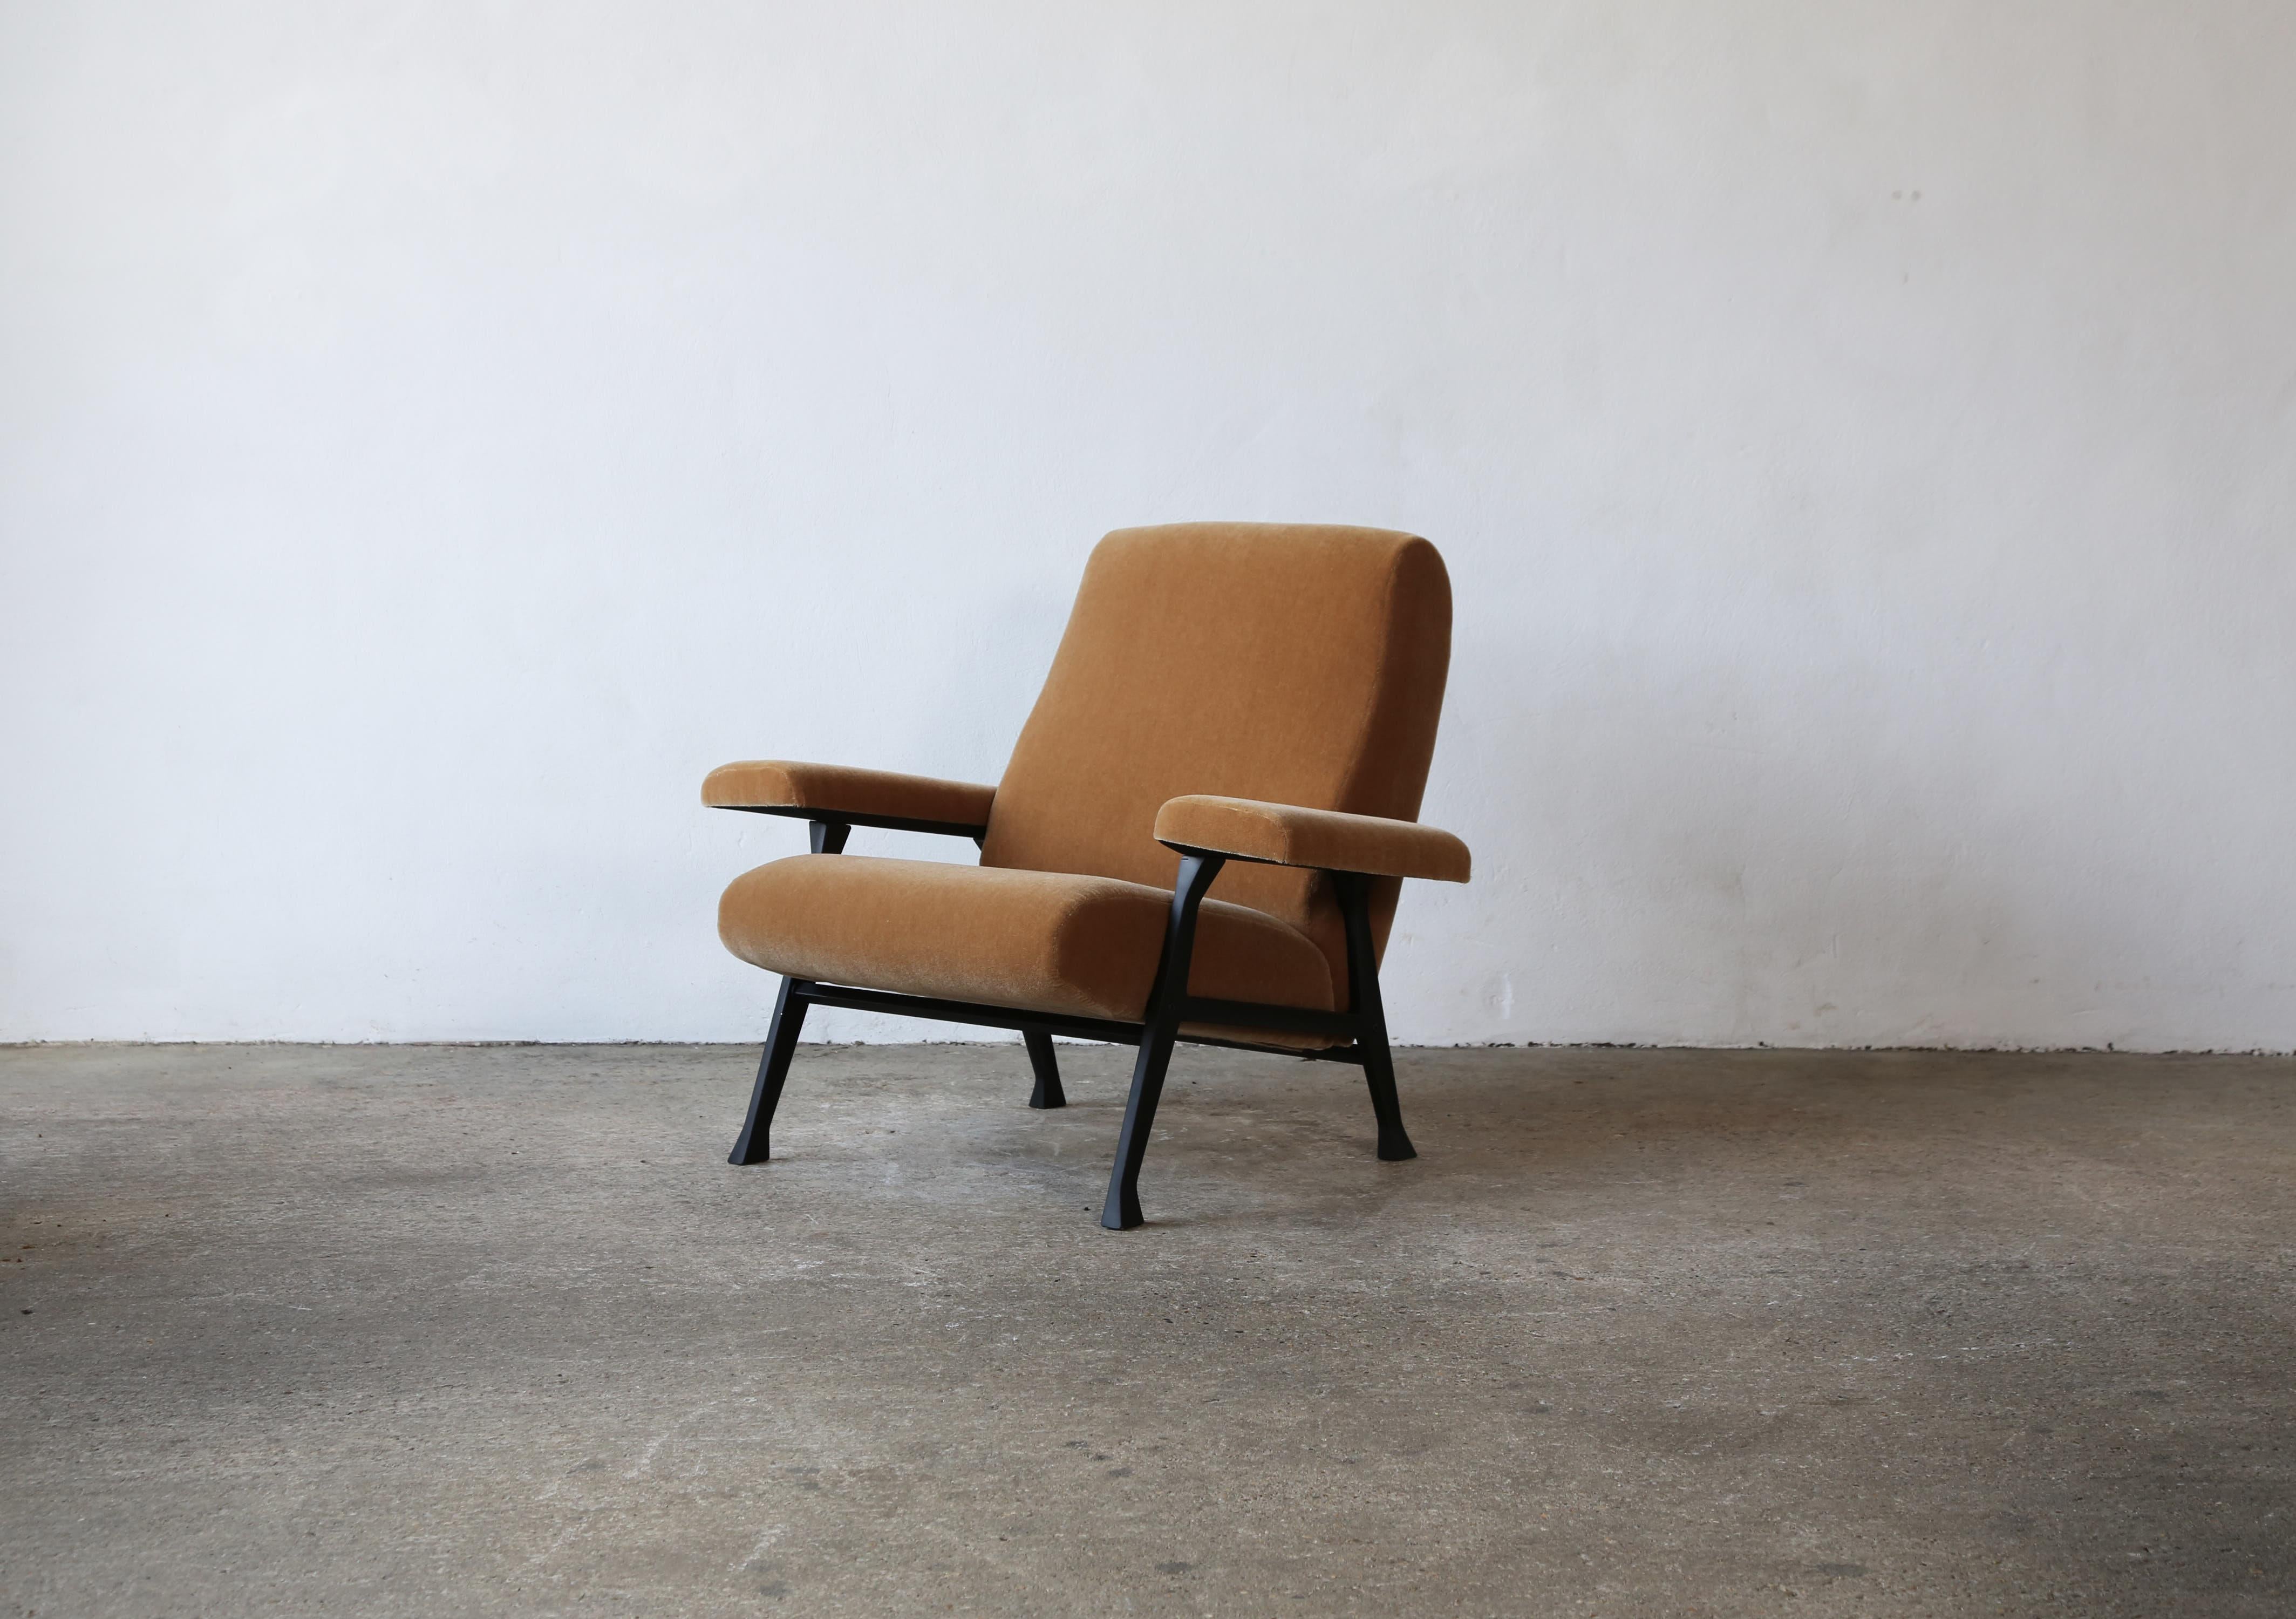 An original and early, rare Roberto Menghi Hall chair, produced by Arflex, Italy, 1950s. Newly upholstered in a luxurious pure mohair fabric. This chair was specified by Gio Ponti for his Iconic Pirelli Tower in Milan. They were awarded the